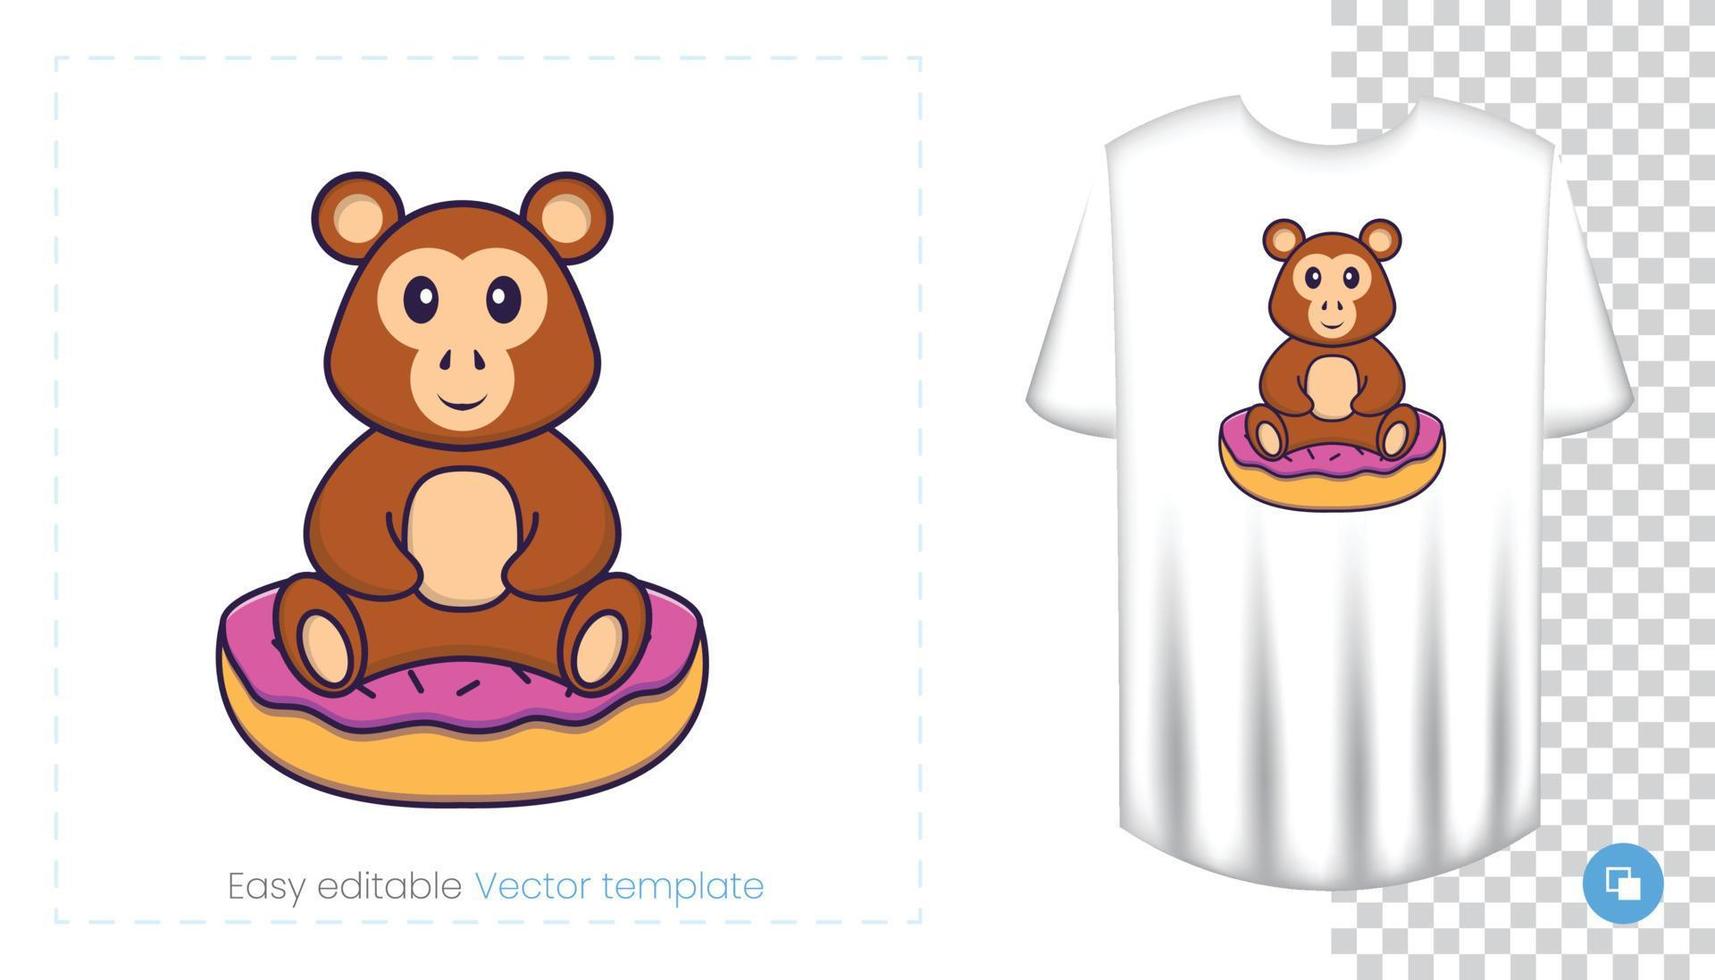 Cute monkey character. Prints on T-shirts, sweatshirts, cases for mobile phones, souvenirs. Isolated vector illustration on white background.